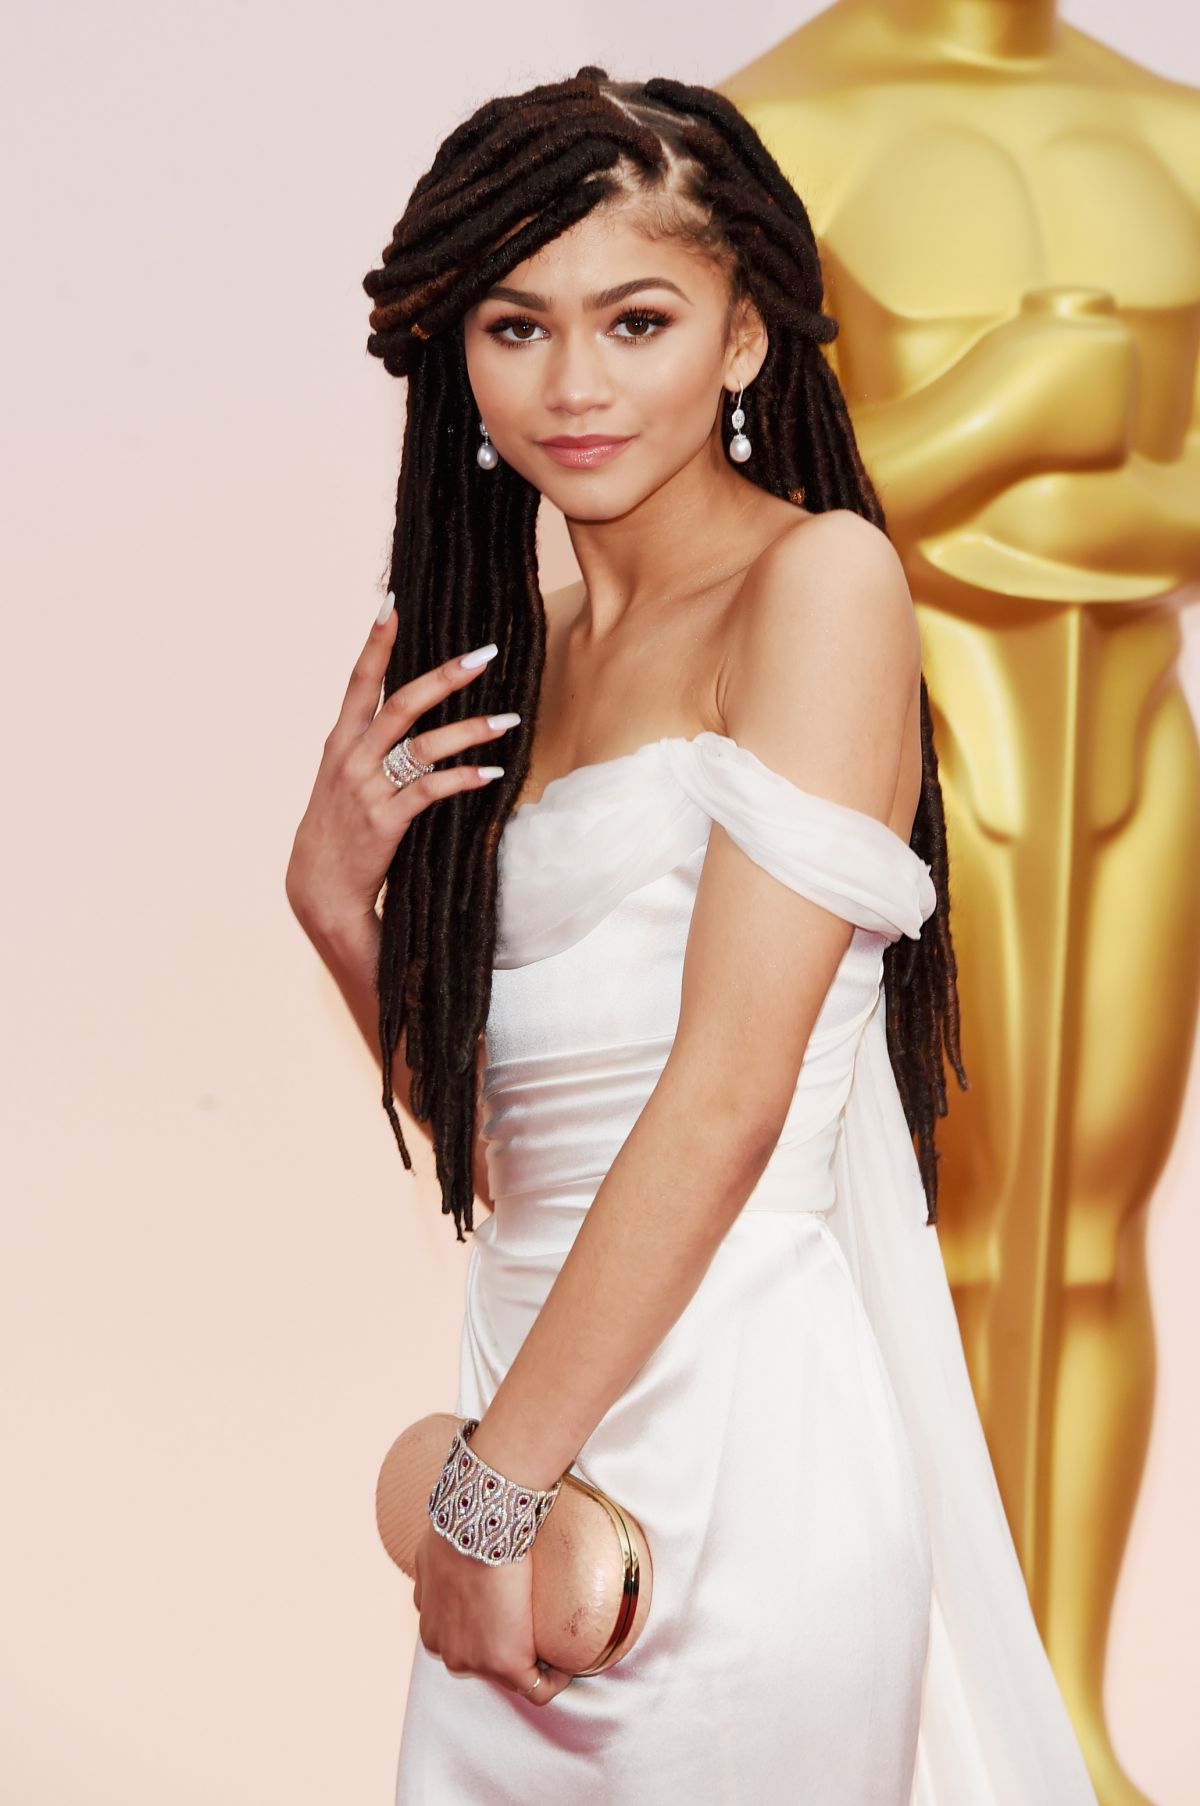 Zendaya Coleman At 87th Annual Academy Awards At The Dolby Theatre In Hollywood 5 